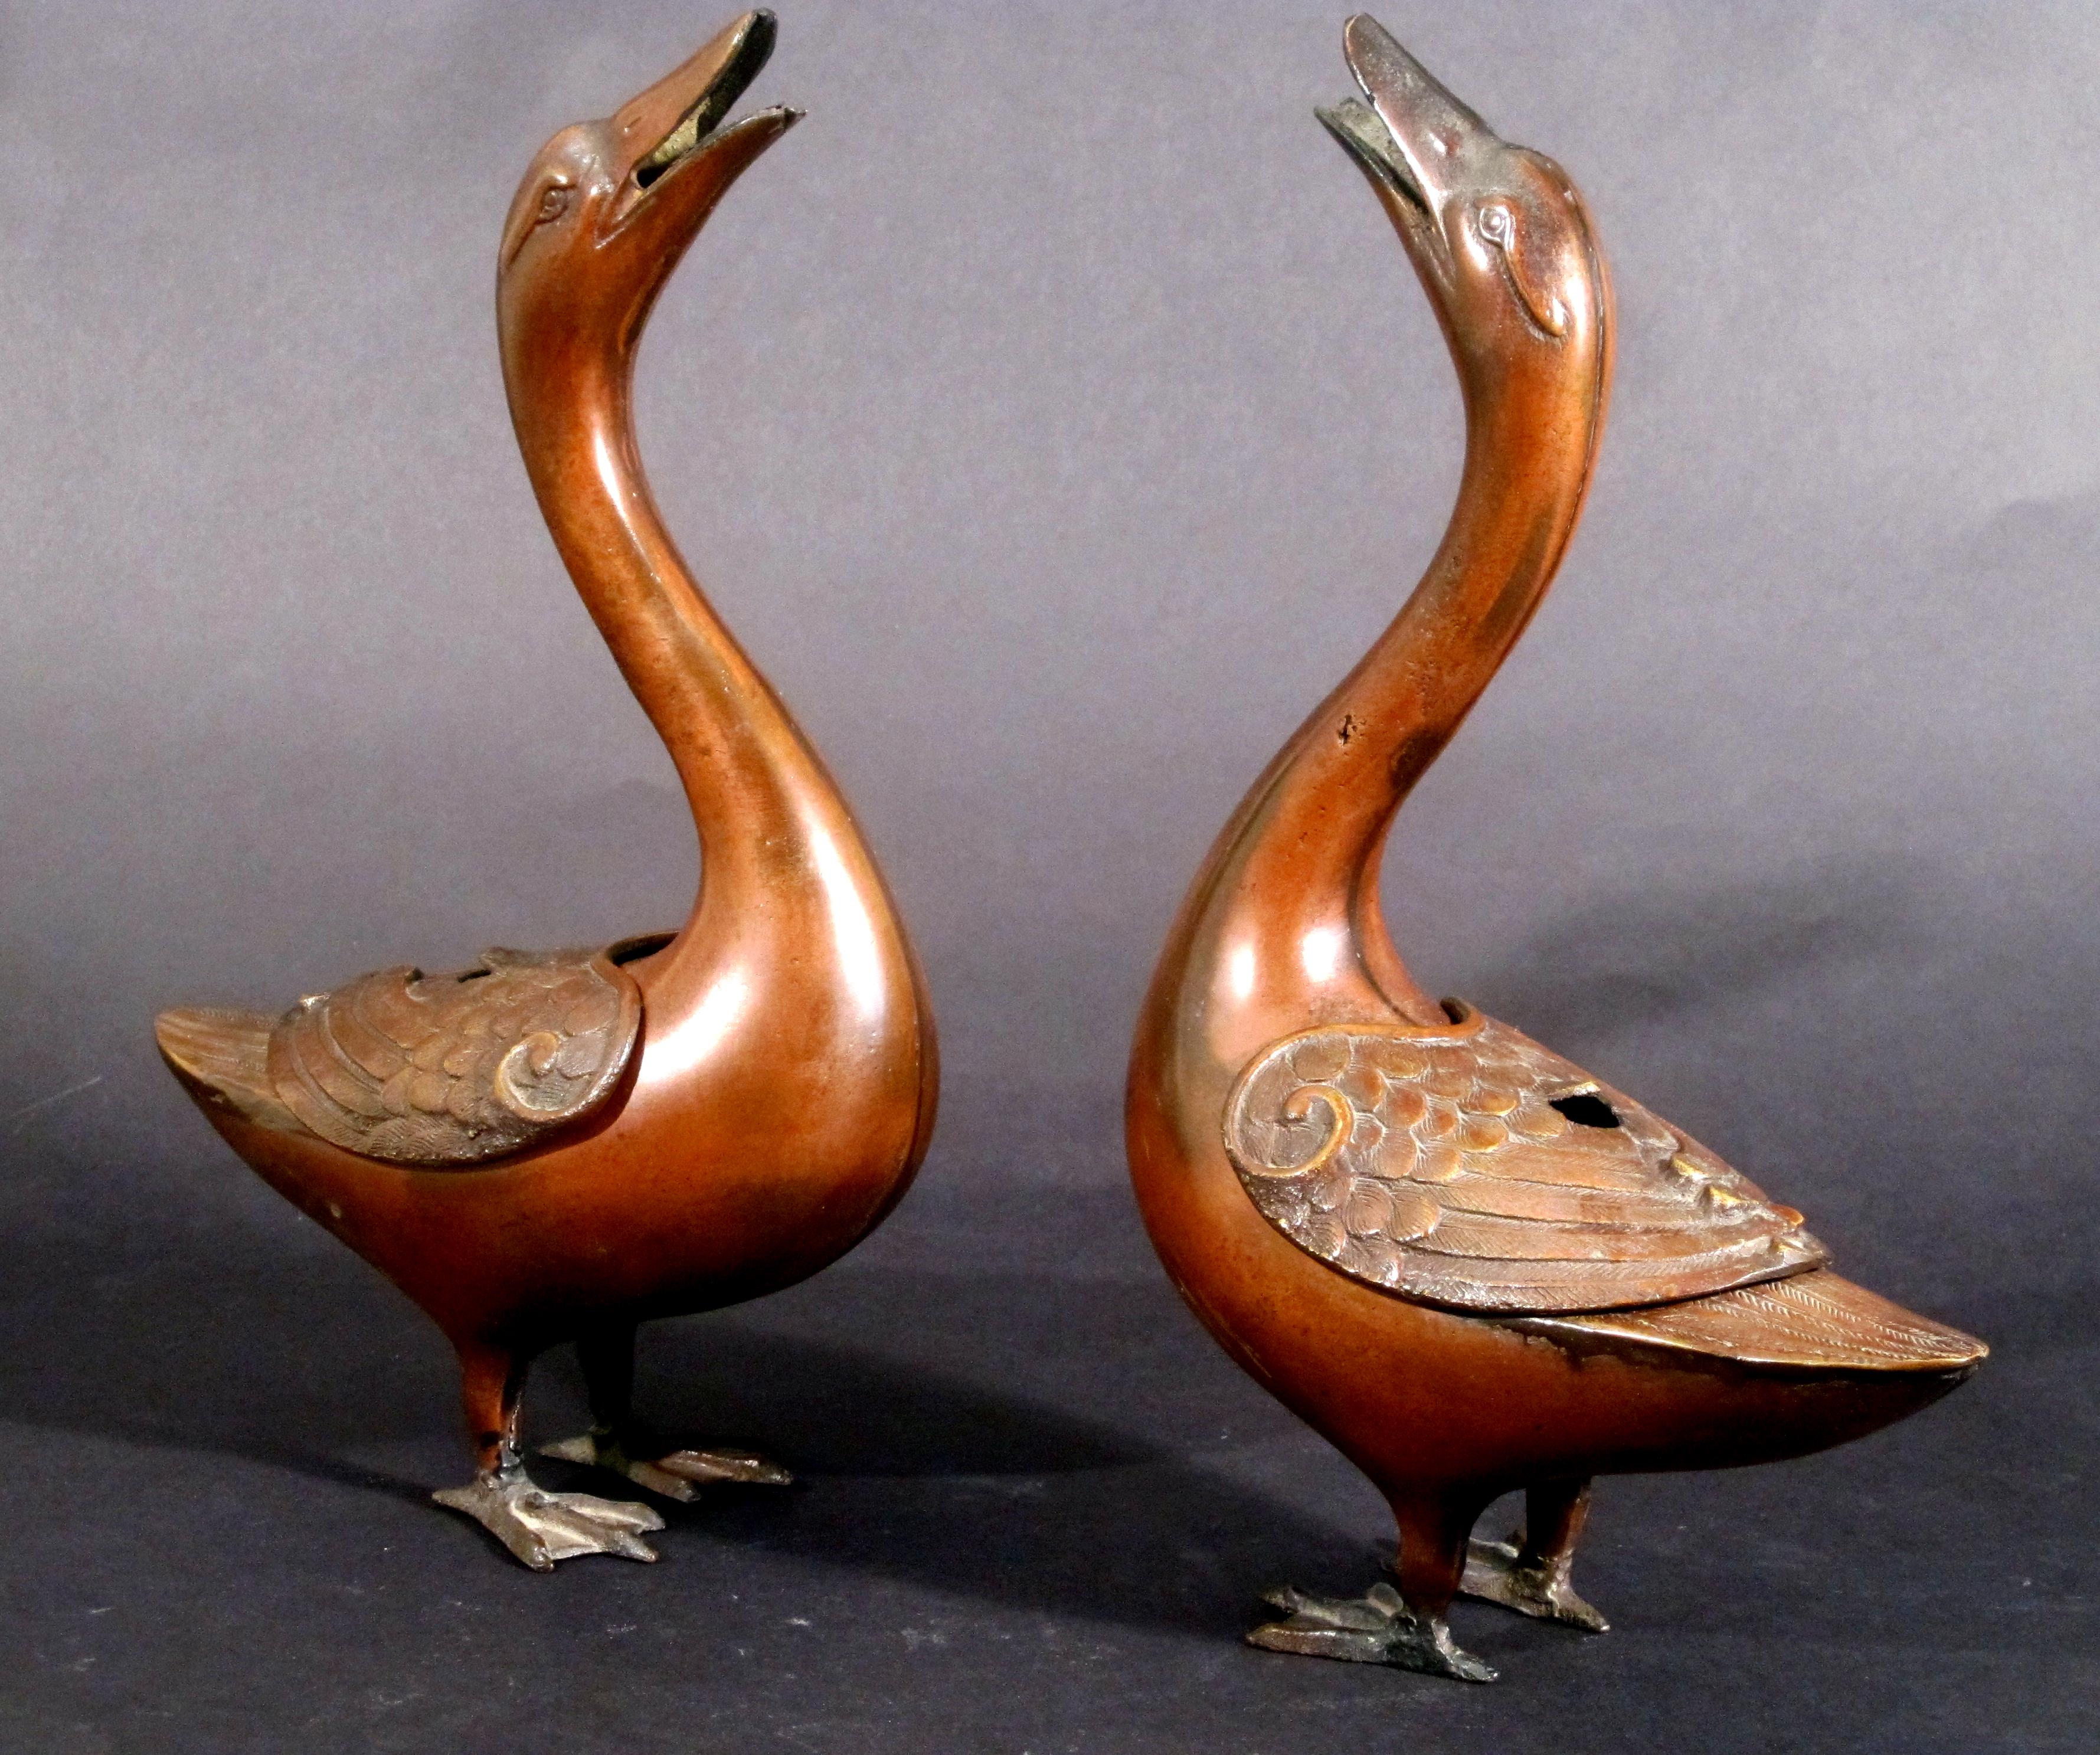 Japanese bronze geese koros, 
Late 19th century.

The pair of goose koros or censors are in the form of geese with their long necks extended and their heads tipped up and their hollow mouths open. They are free-standing with large web feet. The